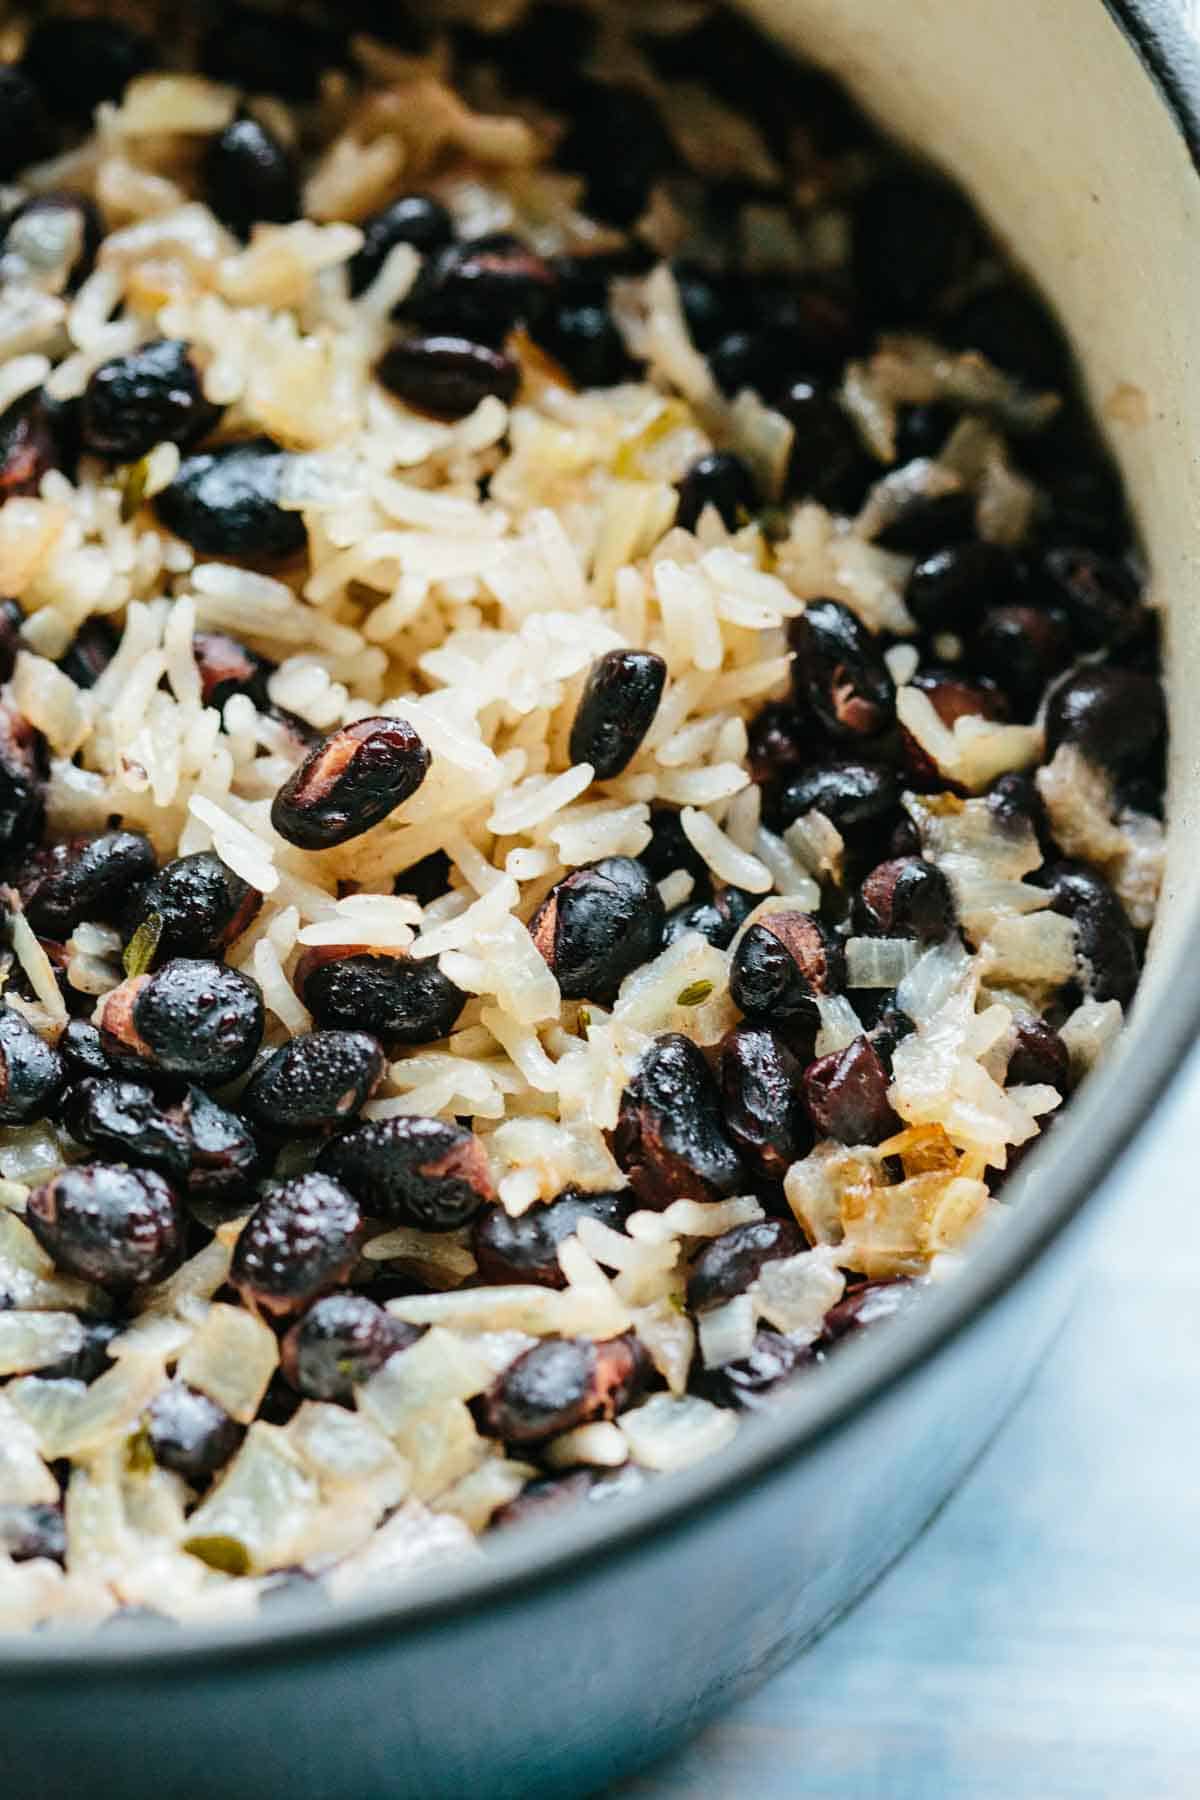 Caribbean rice and black beans with coconut in a pot.